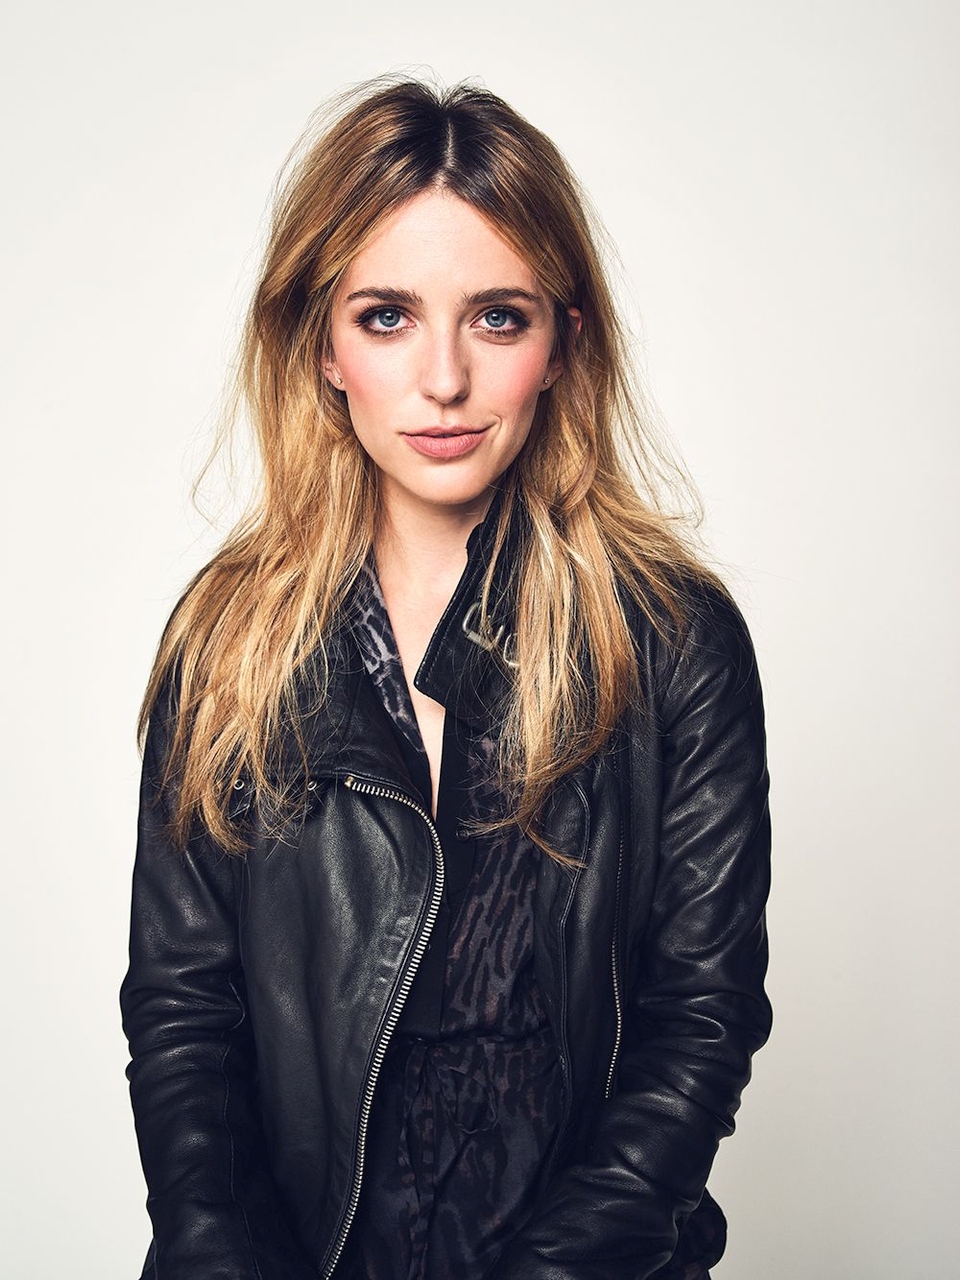 Jessica Rothe Women Actress Blue Eyes Long Hair Simple Background Black Jackets 960x1280